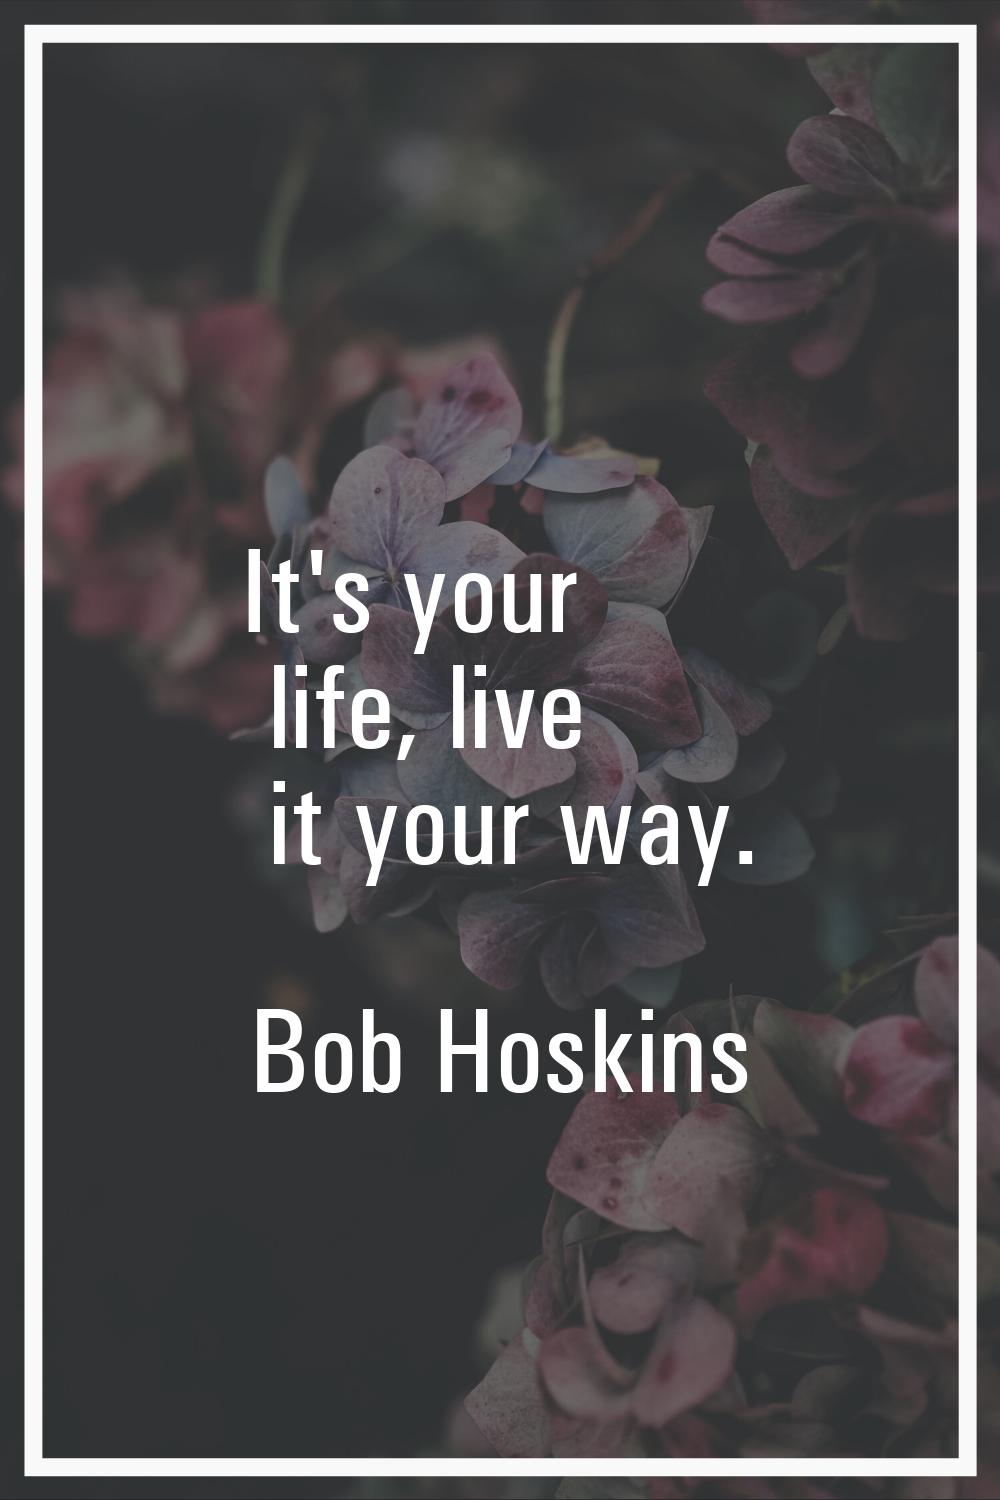 It's your life, live it your way.